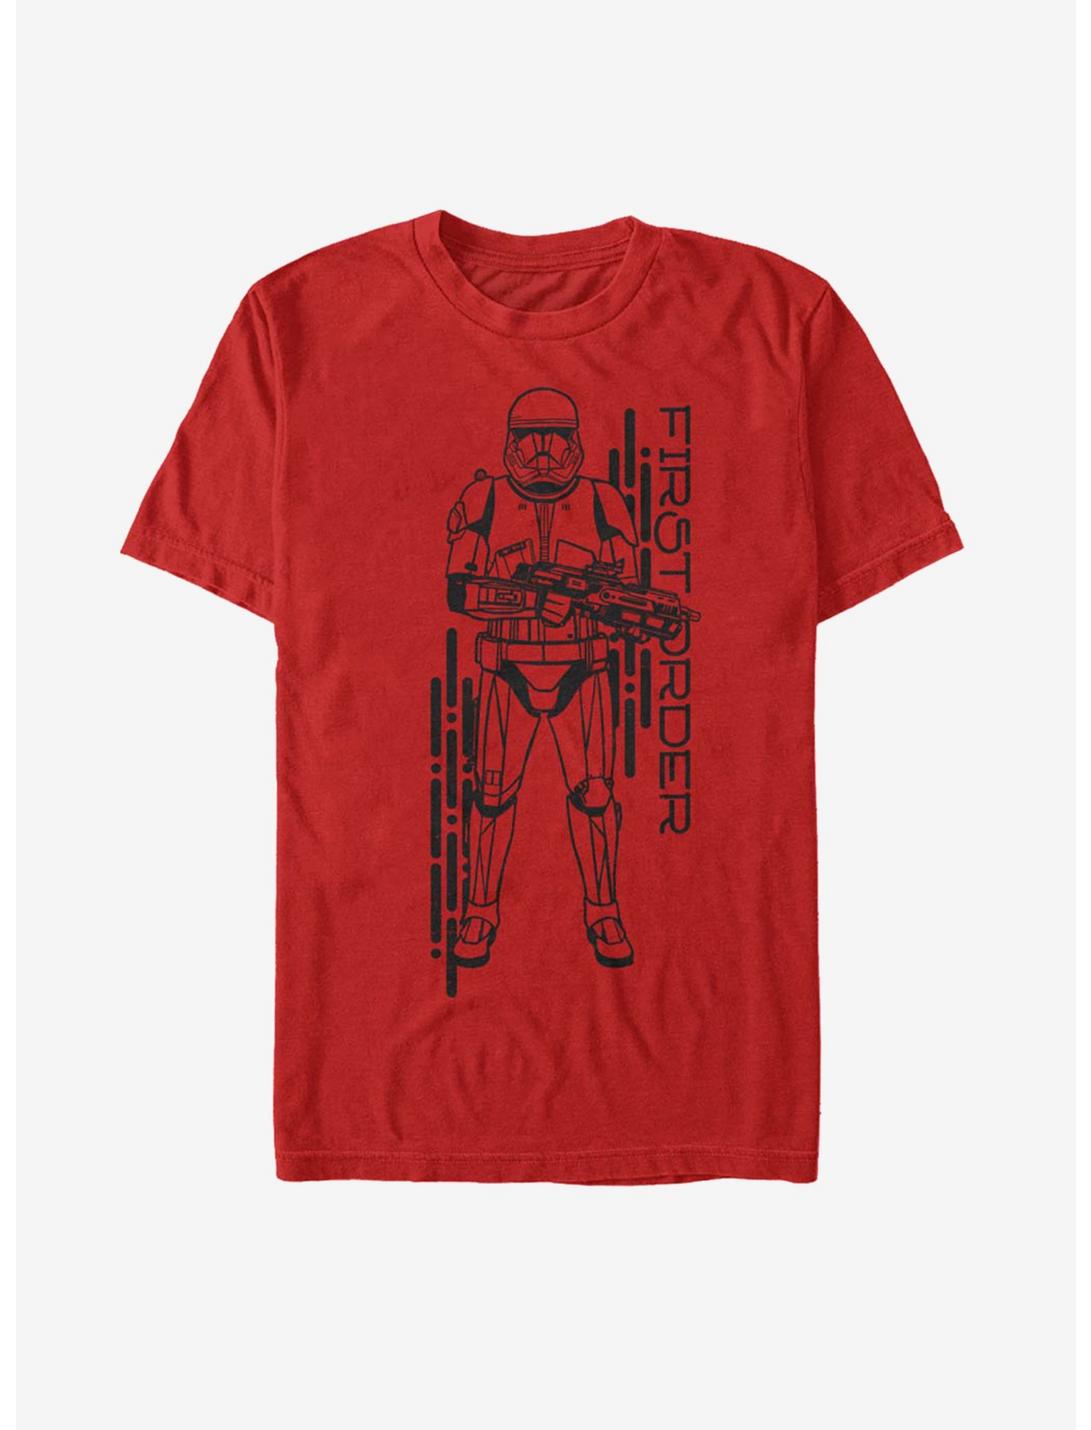 Star Wars Episode IX The Rise Of Skywalker Project Red T-Shirt, RED, hi-res